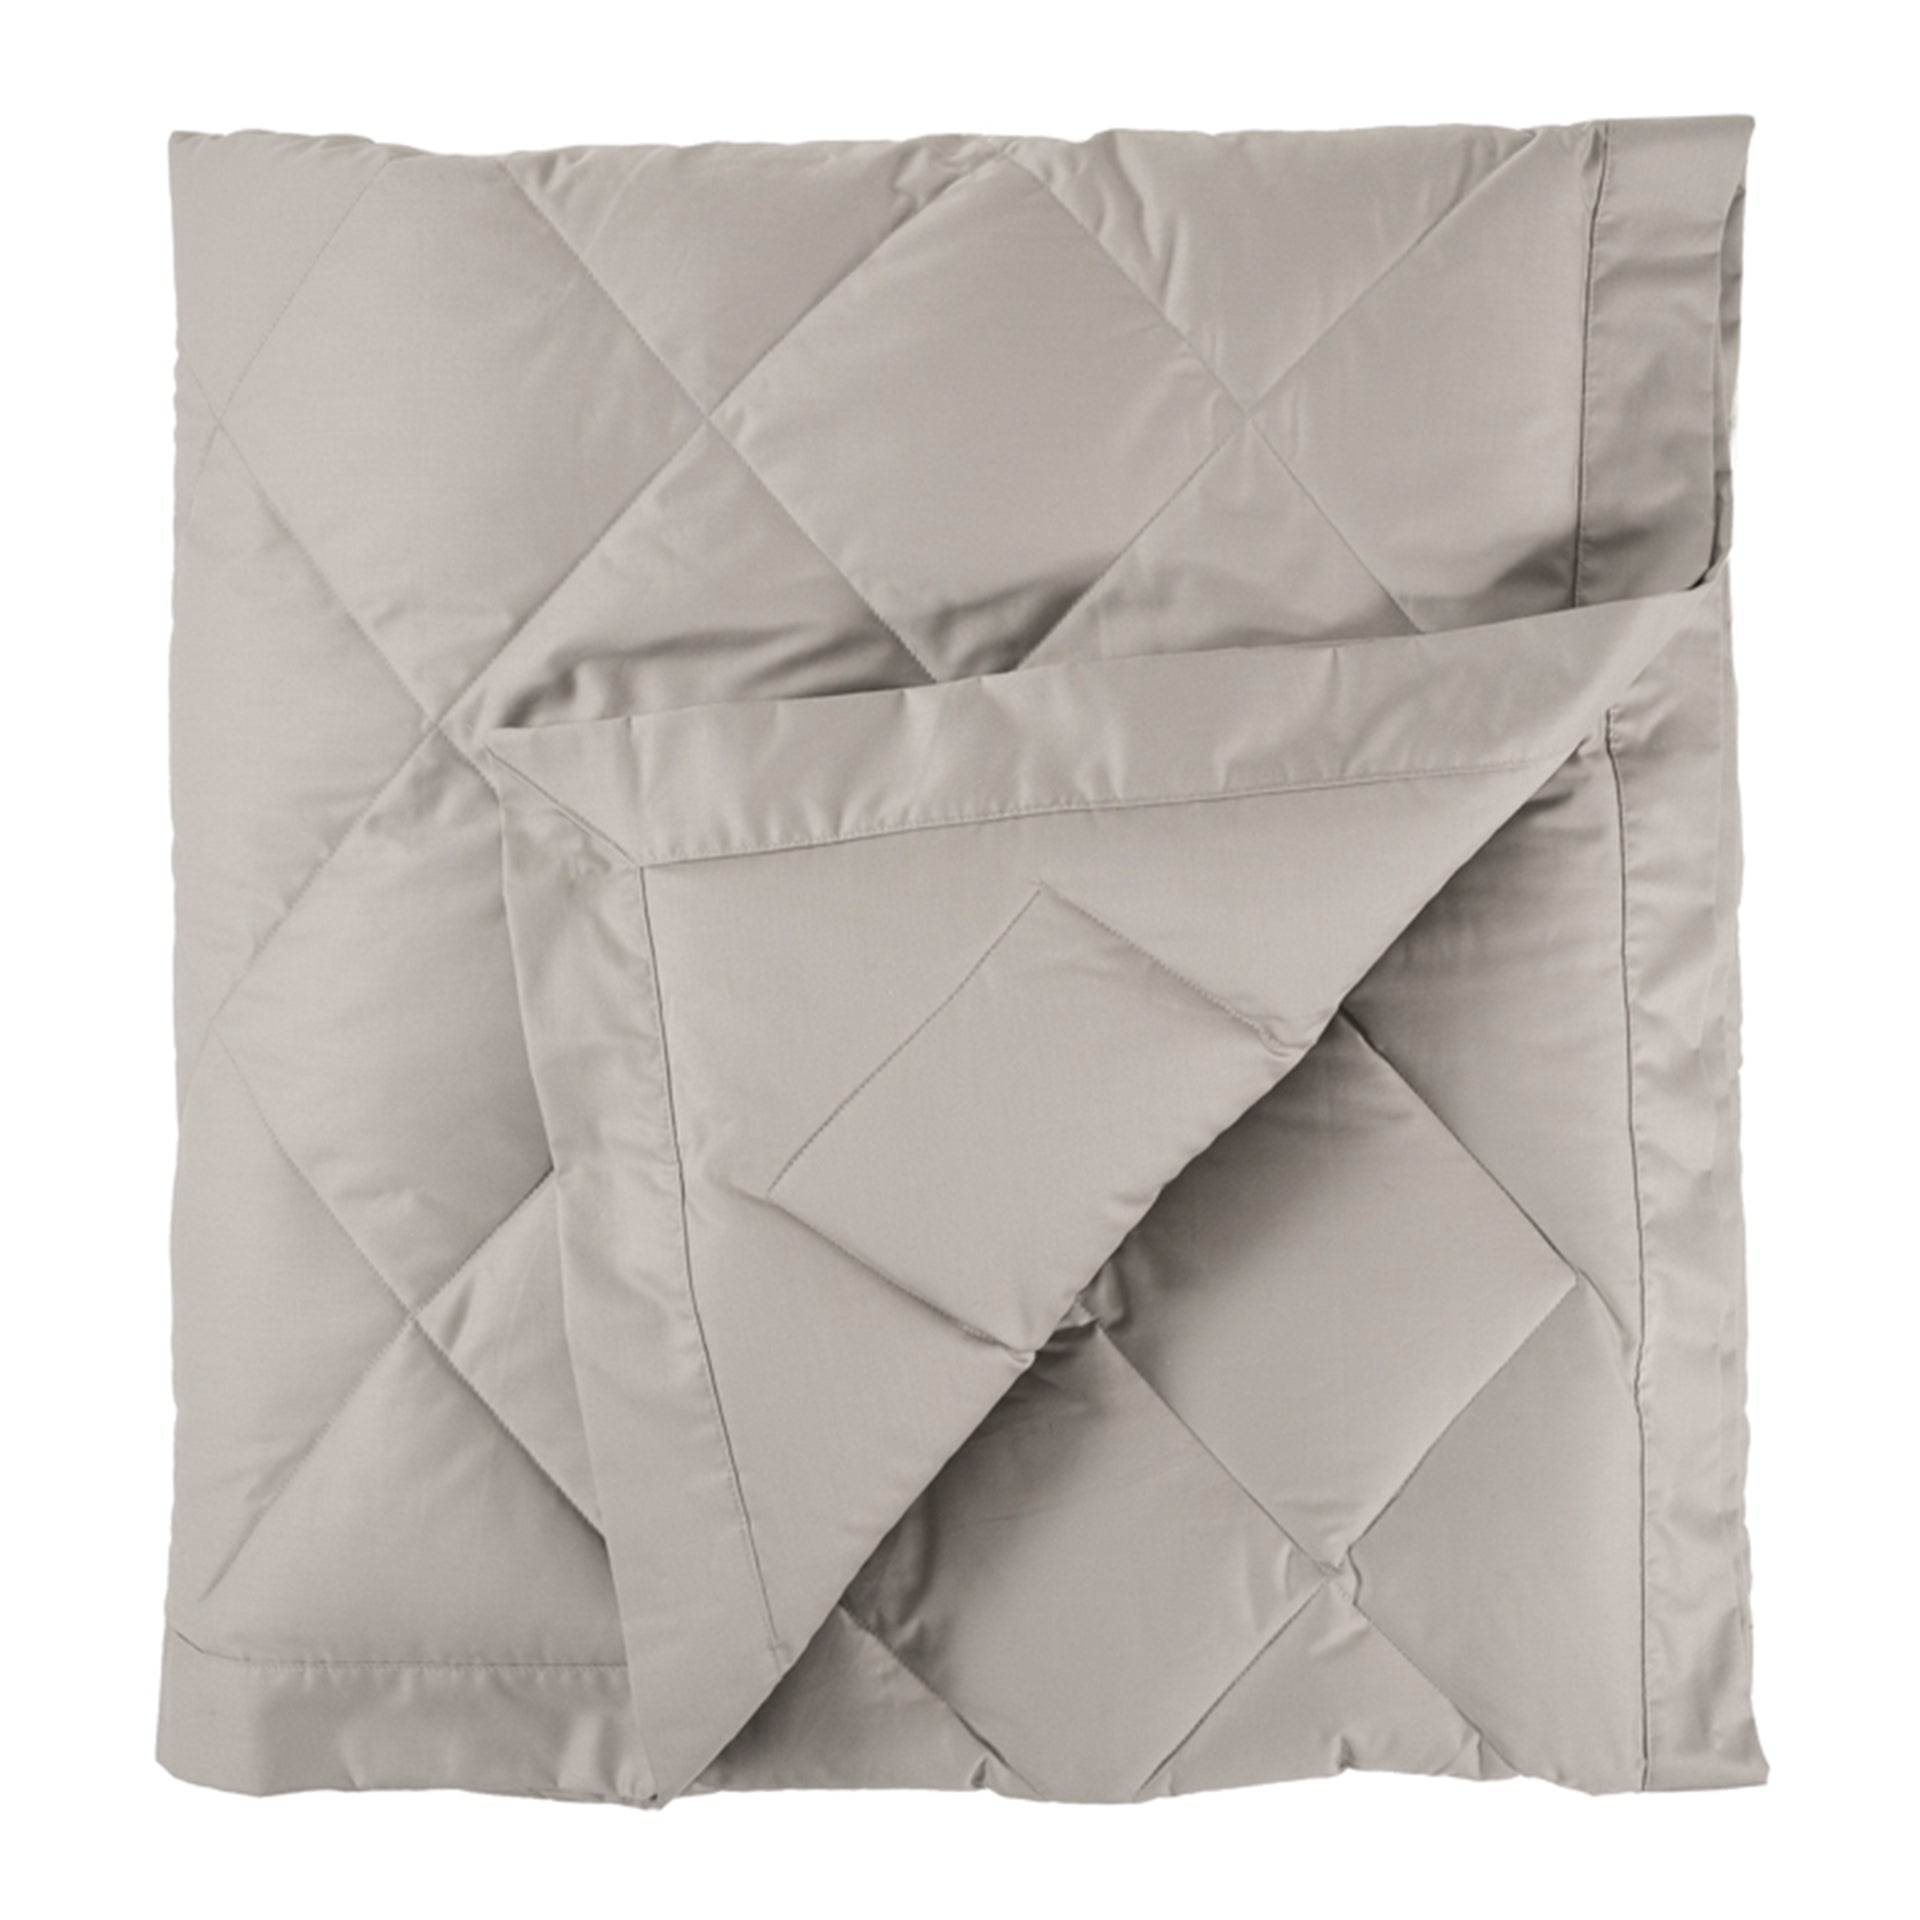 scandia home down blanket in the color shale, folded 